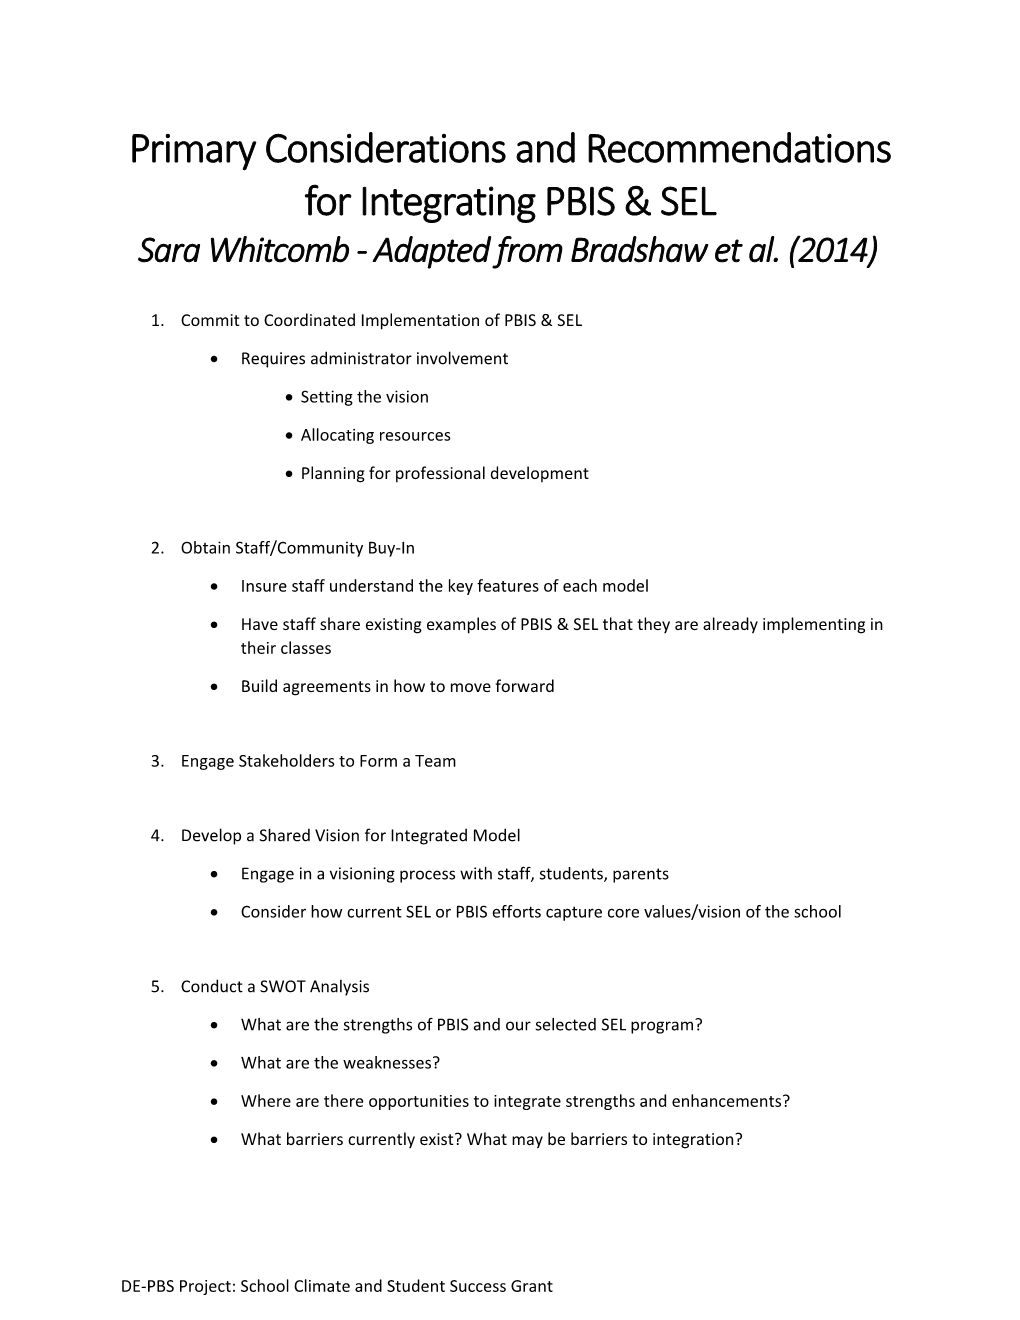 Primary Considerations and Recommendations for Integrating PBIS & SEL